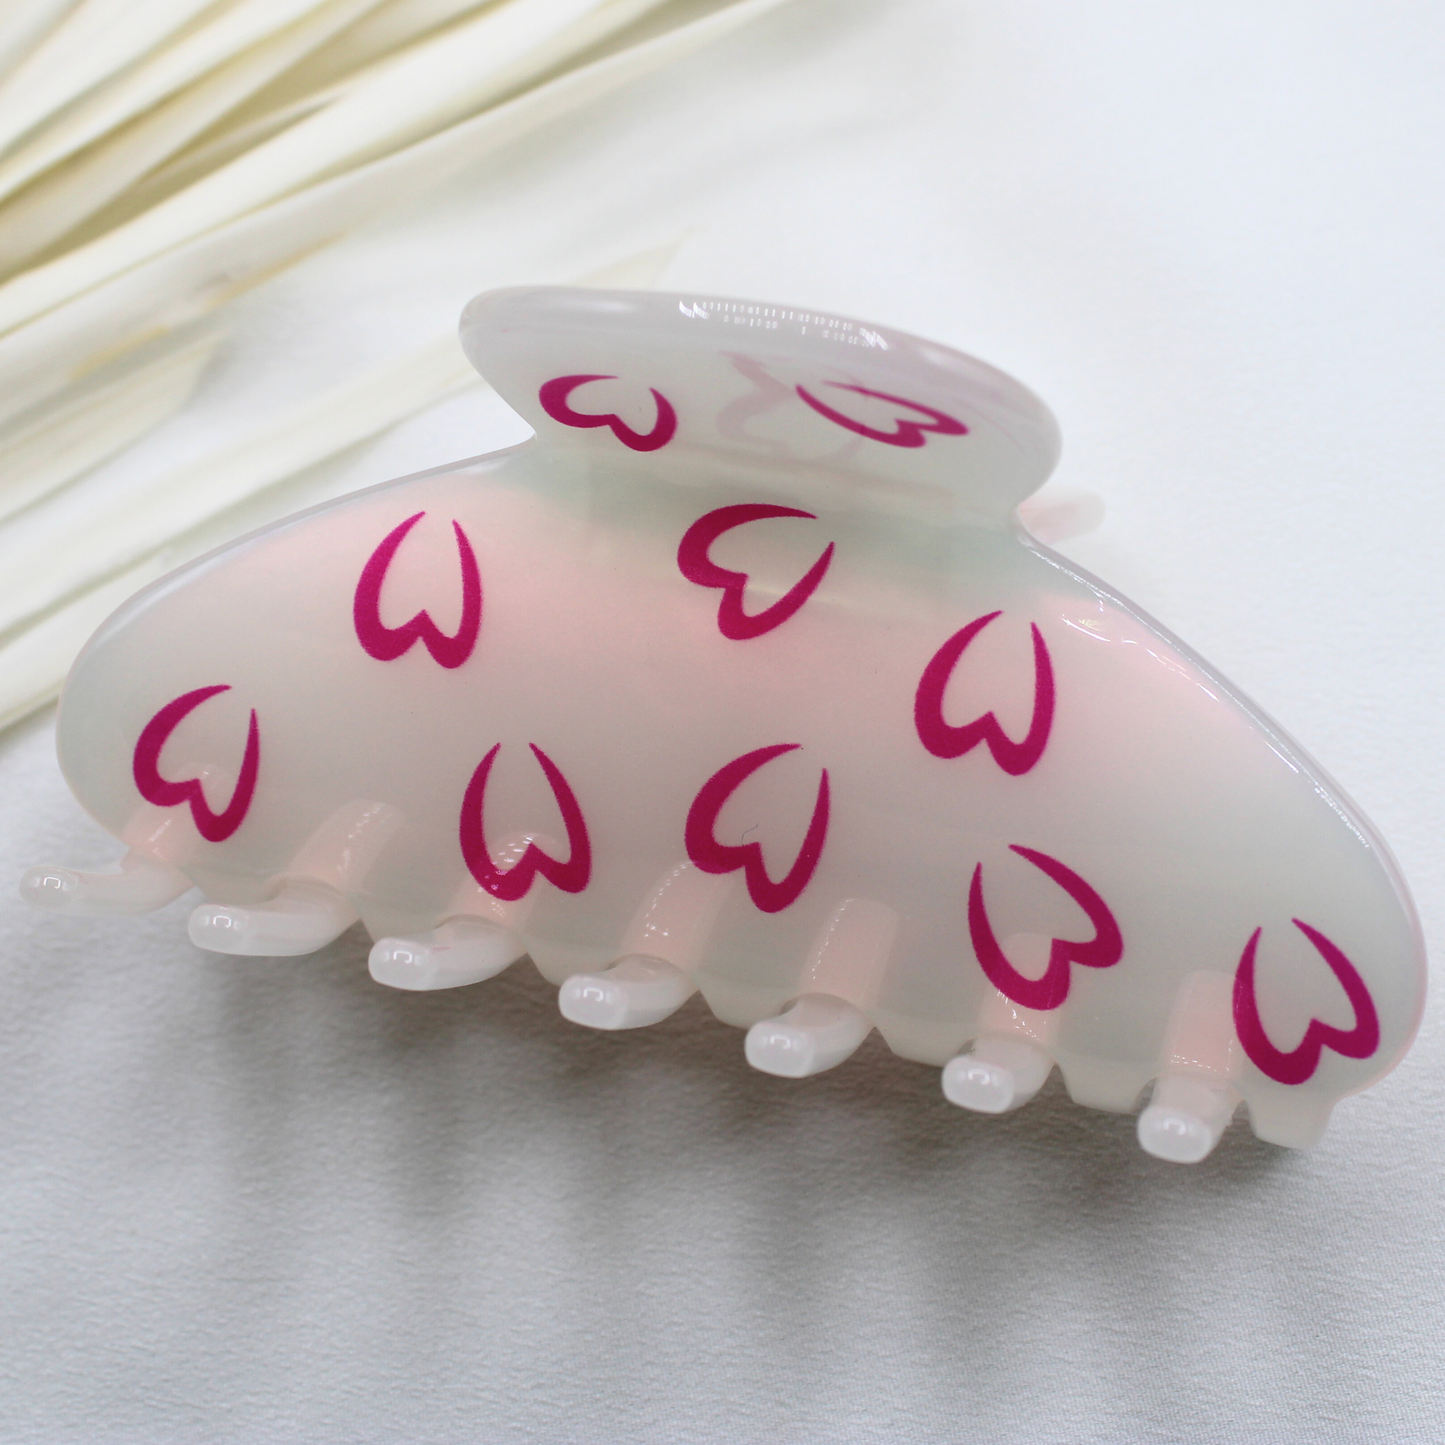 Seina Cellulose Acetate Hair Claw Clips